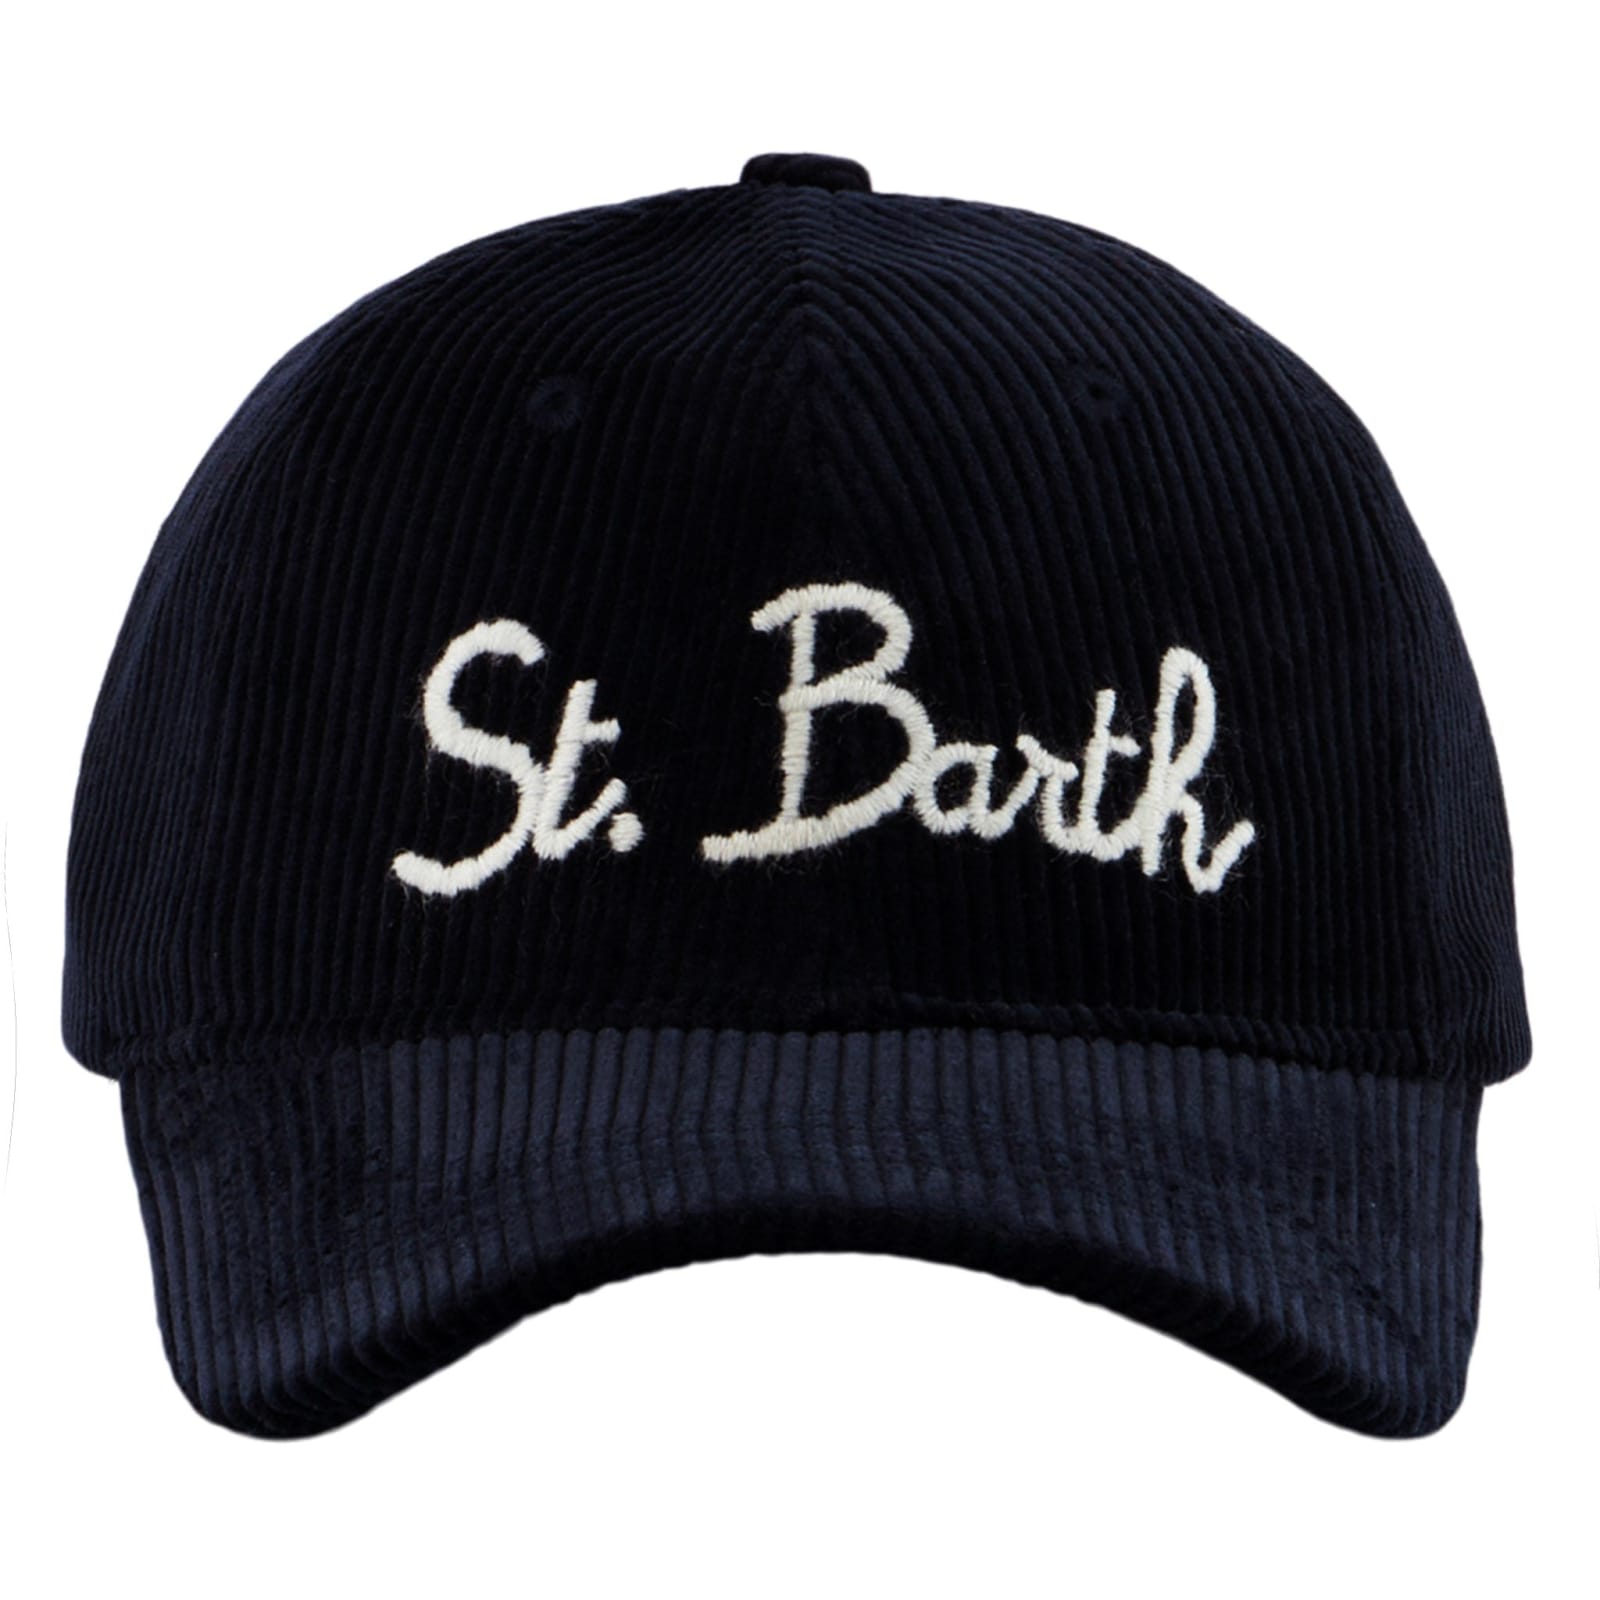 Baseball Corduroy Cap With St. Barth Embroidery